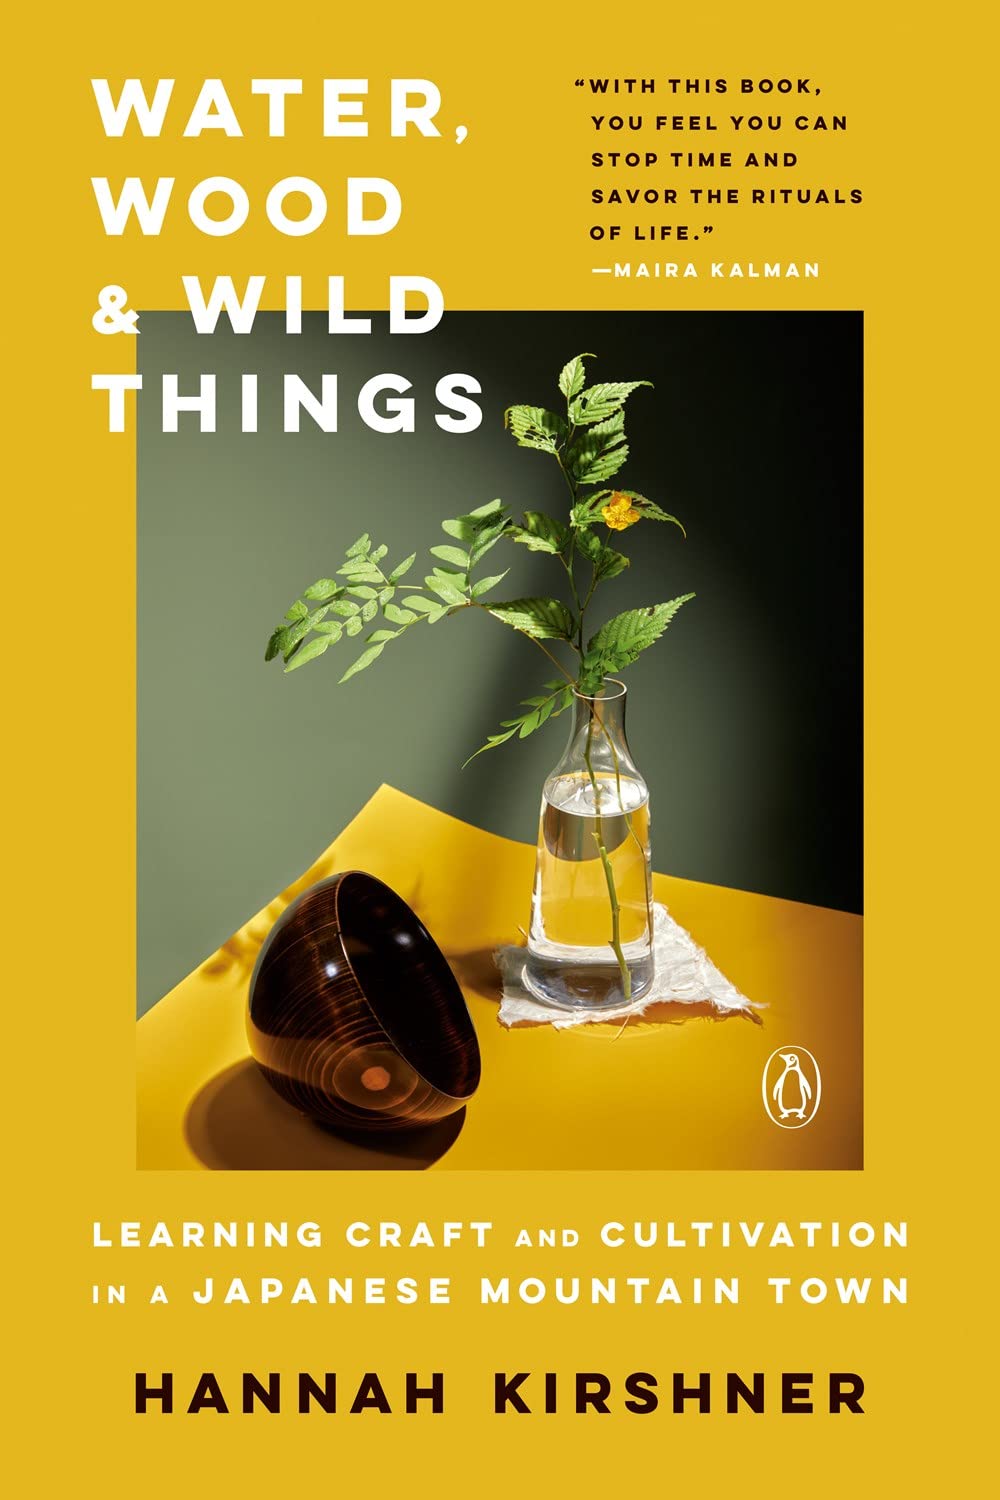 Water, Wood & Wild Things: Learning Craft and Cultivation in a Japanese Mountain Town (Hannah Kirshner)